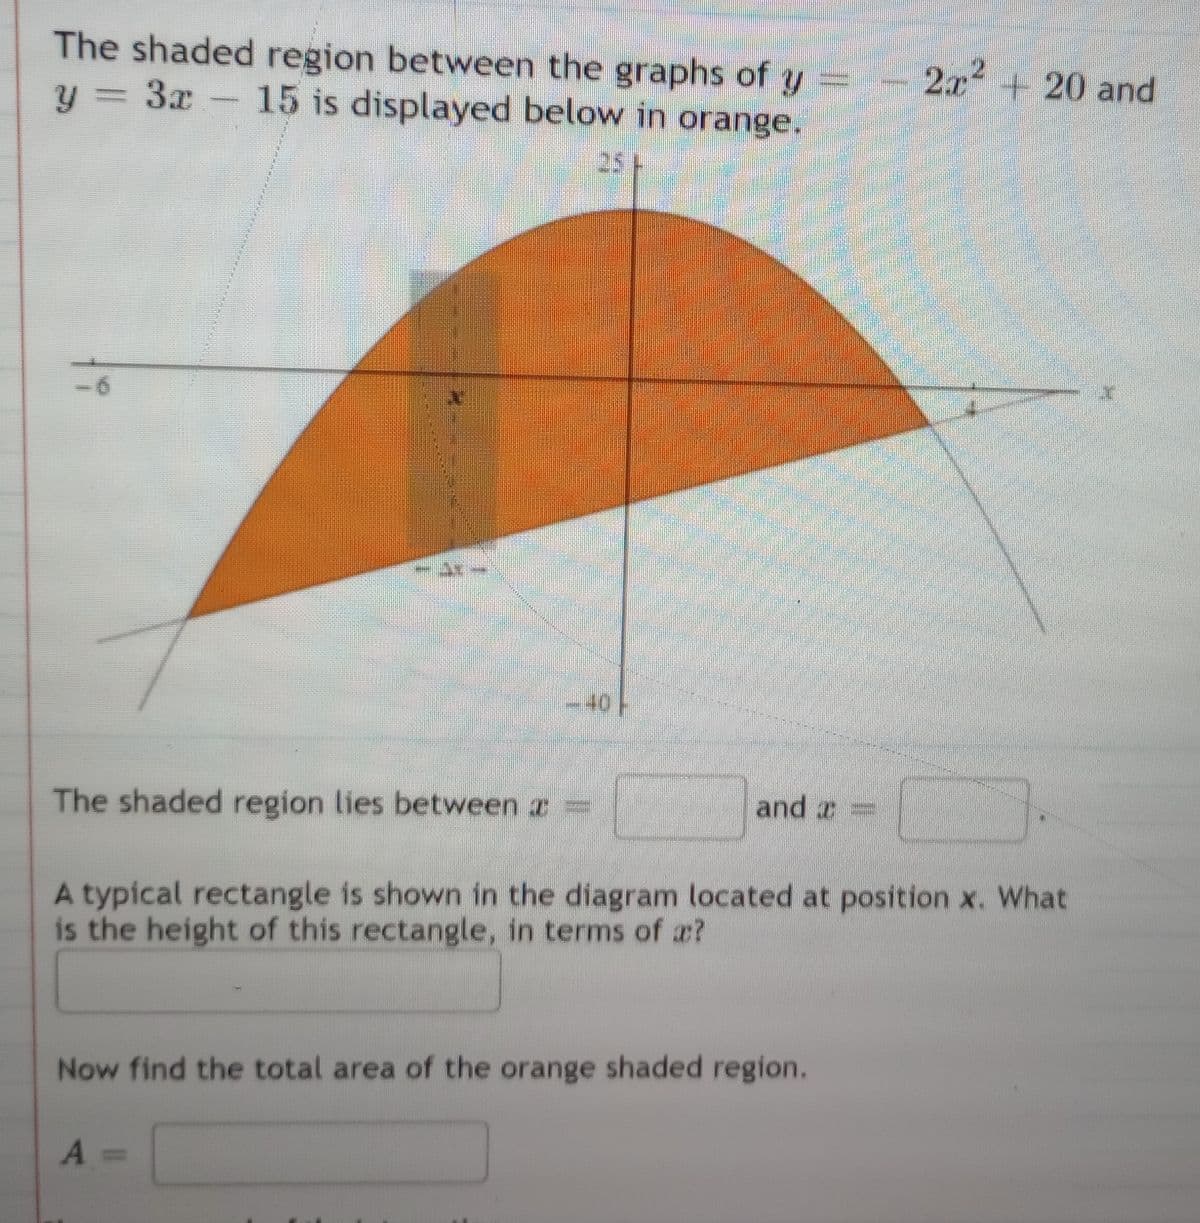 The shaded region between the graphs of y
y = 3x - 15 is displayed below in orange.
5.0
140
The shaded region lies between ï =
and =
2x² + 20 and
A typical rectangle is shown in the diagram located at position x. What
is the height of this rectangle, in terms of a?
Now find the total area of the orange shaded region.
A =